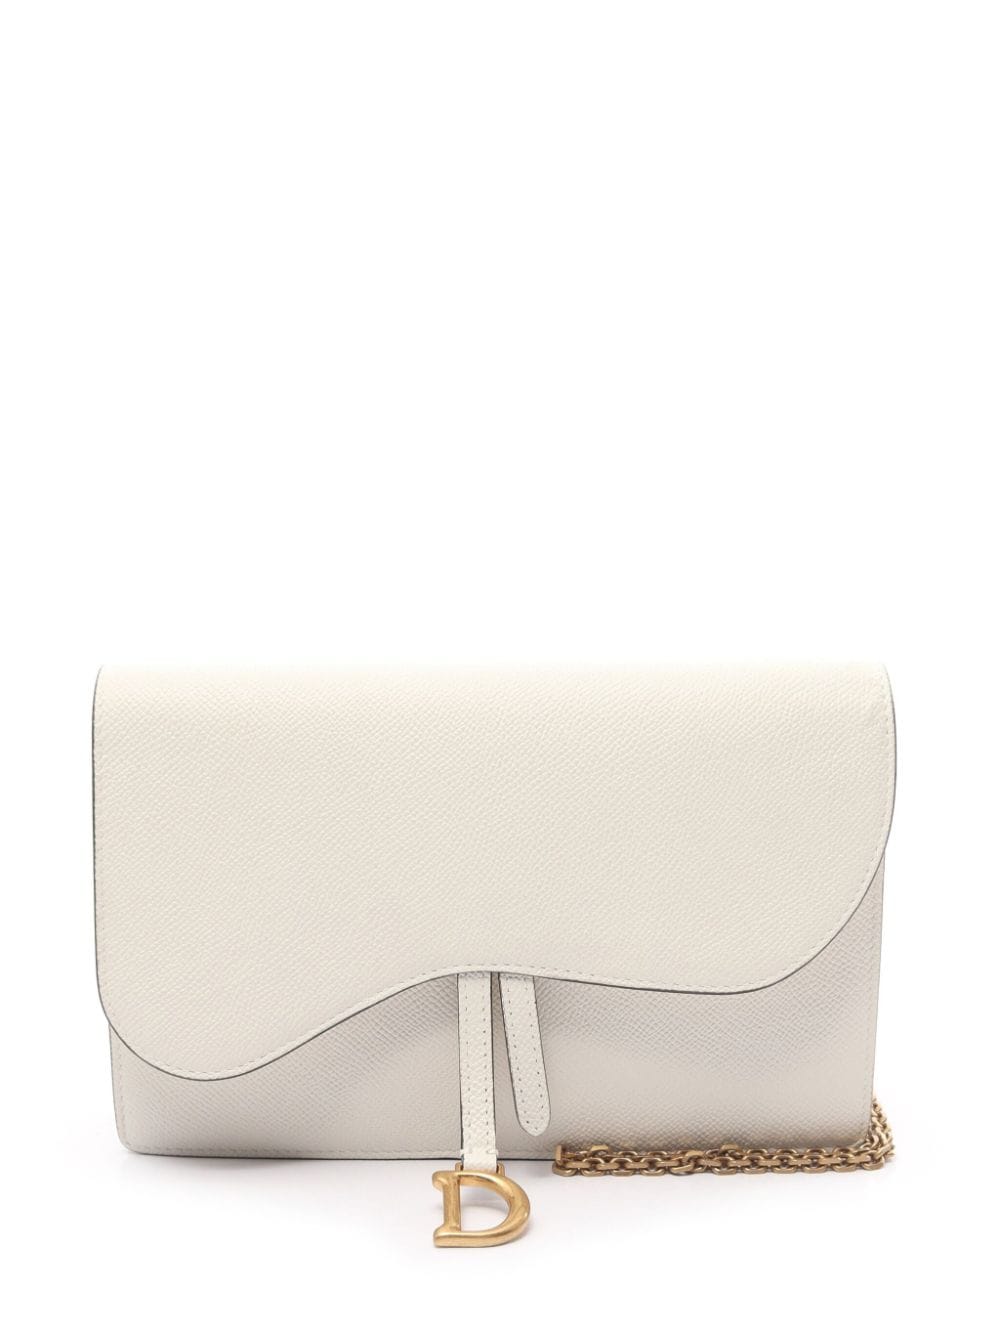 Pre-owned Dior 2010 Saddle Clutch Bag In White